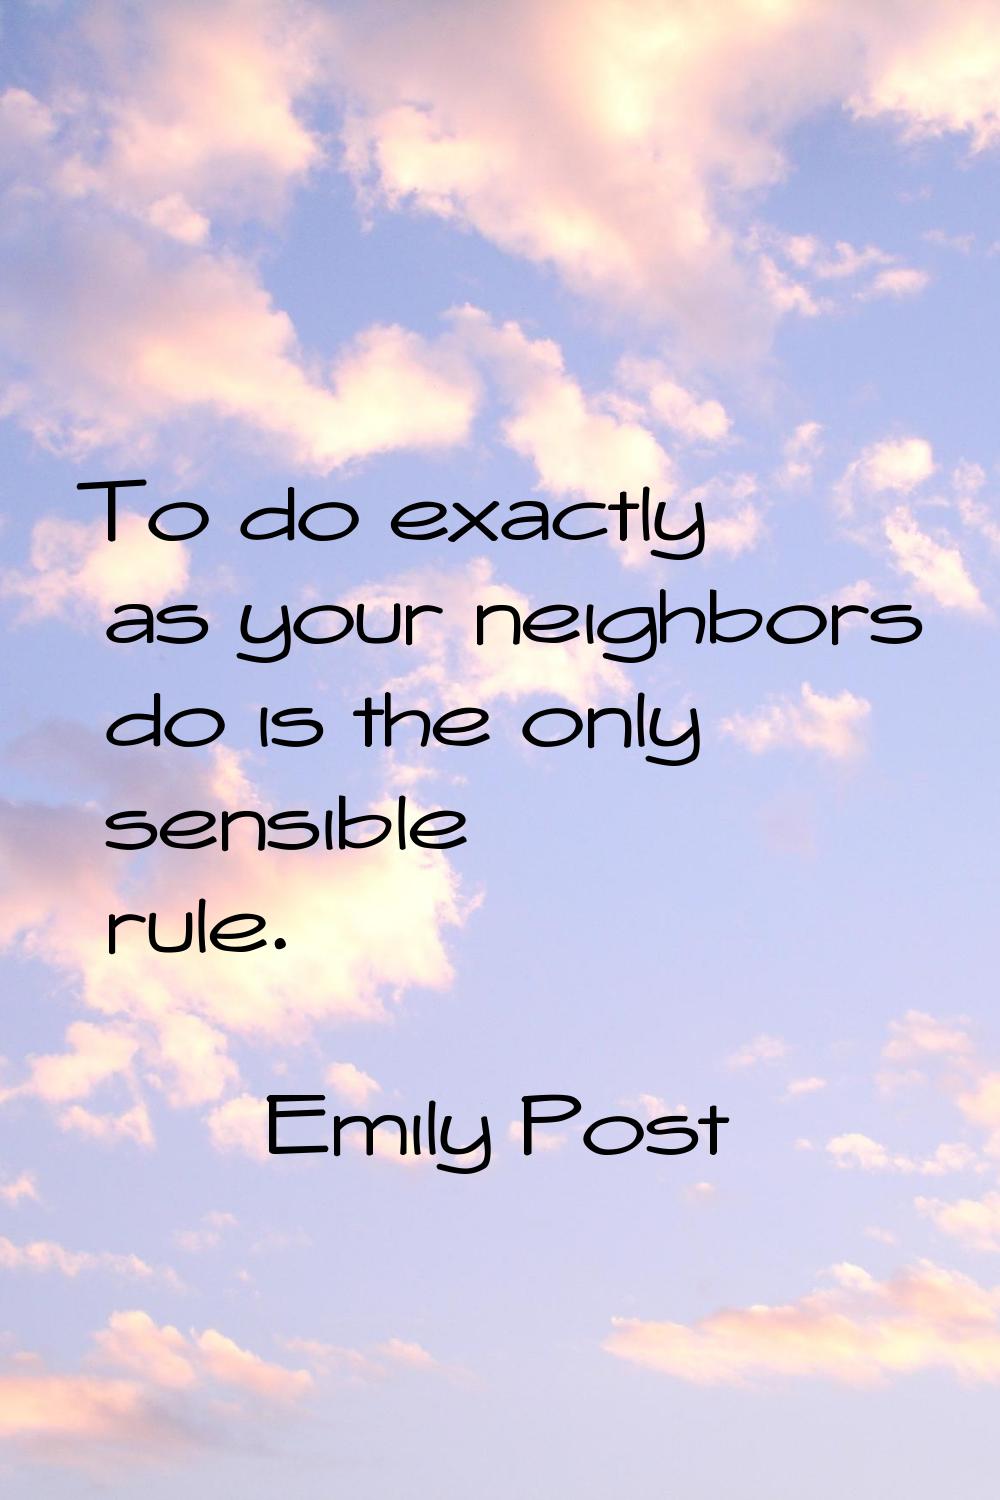 To do exactly as your neighbors do is the only sensible rule.